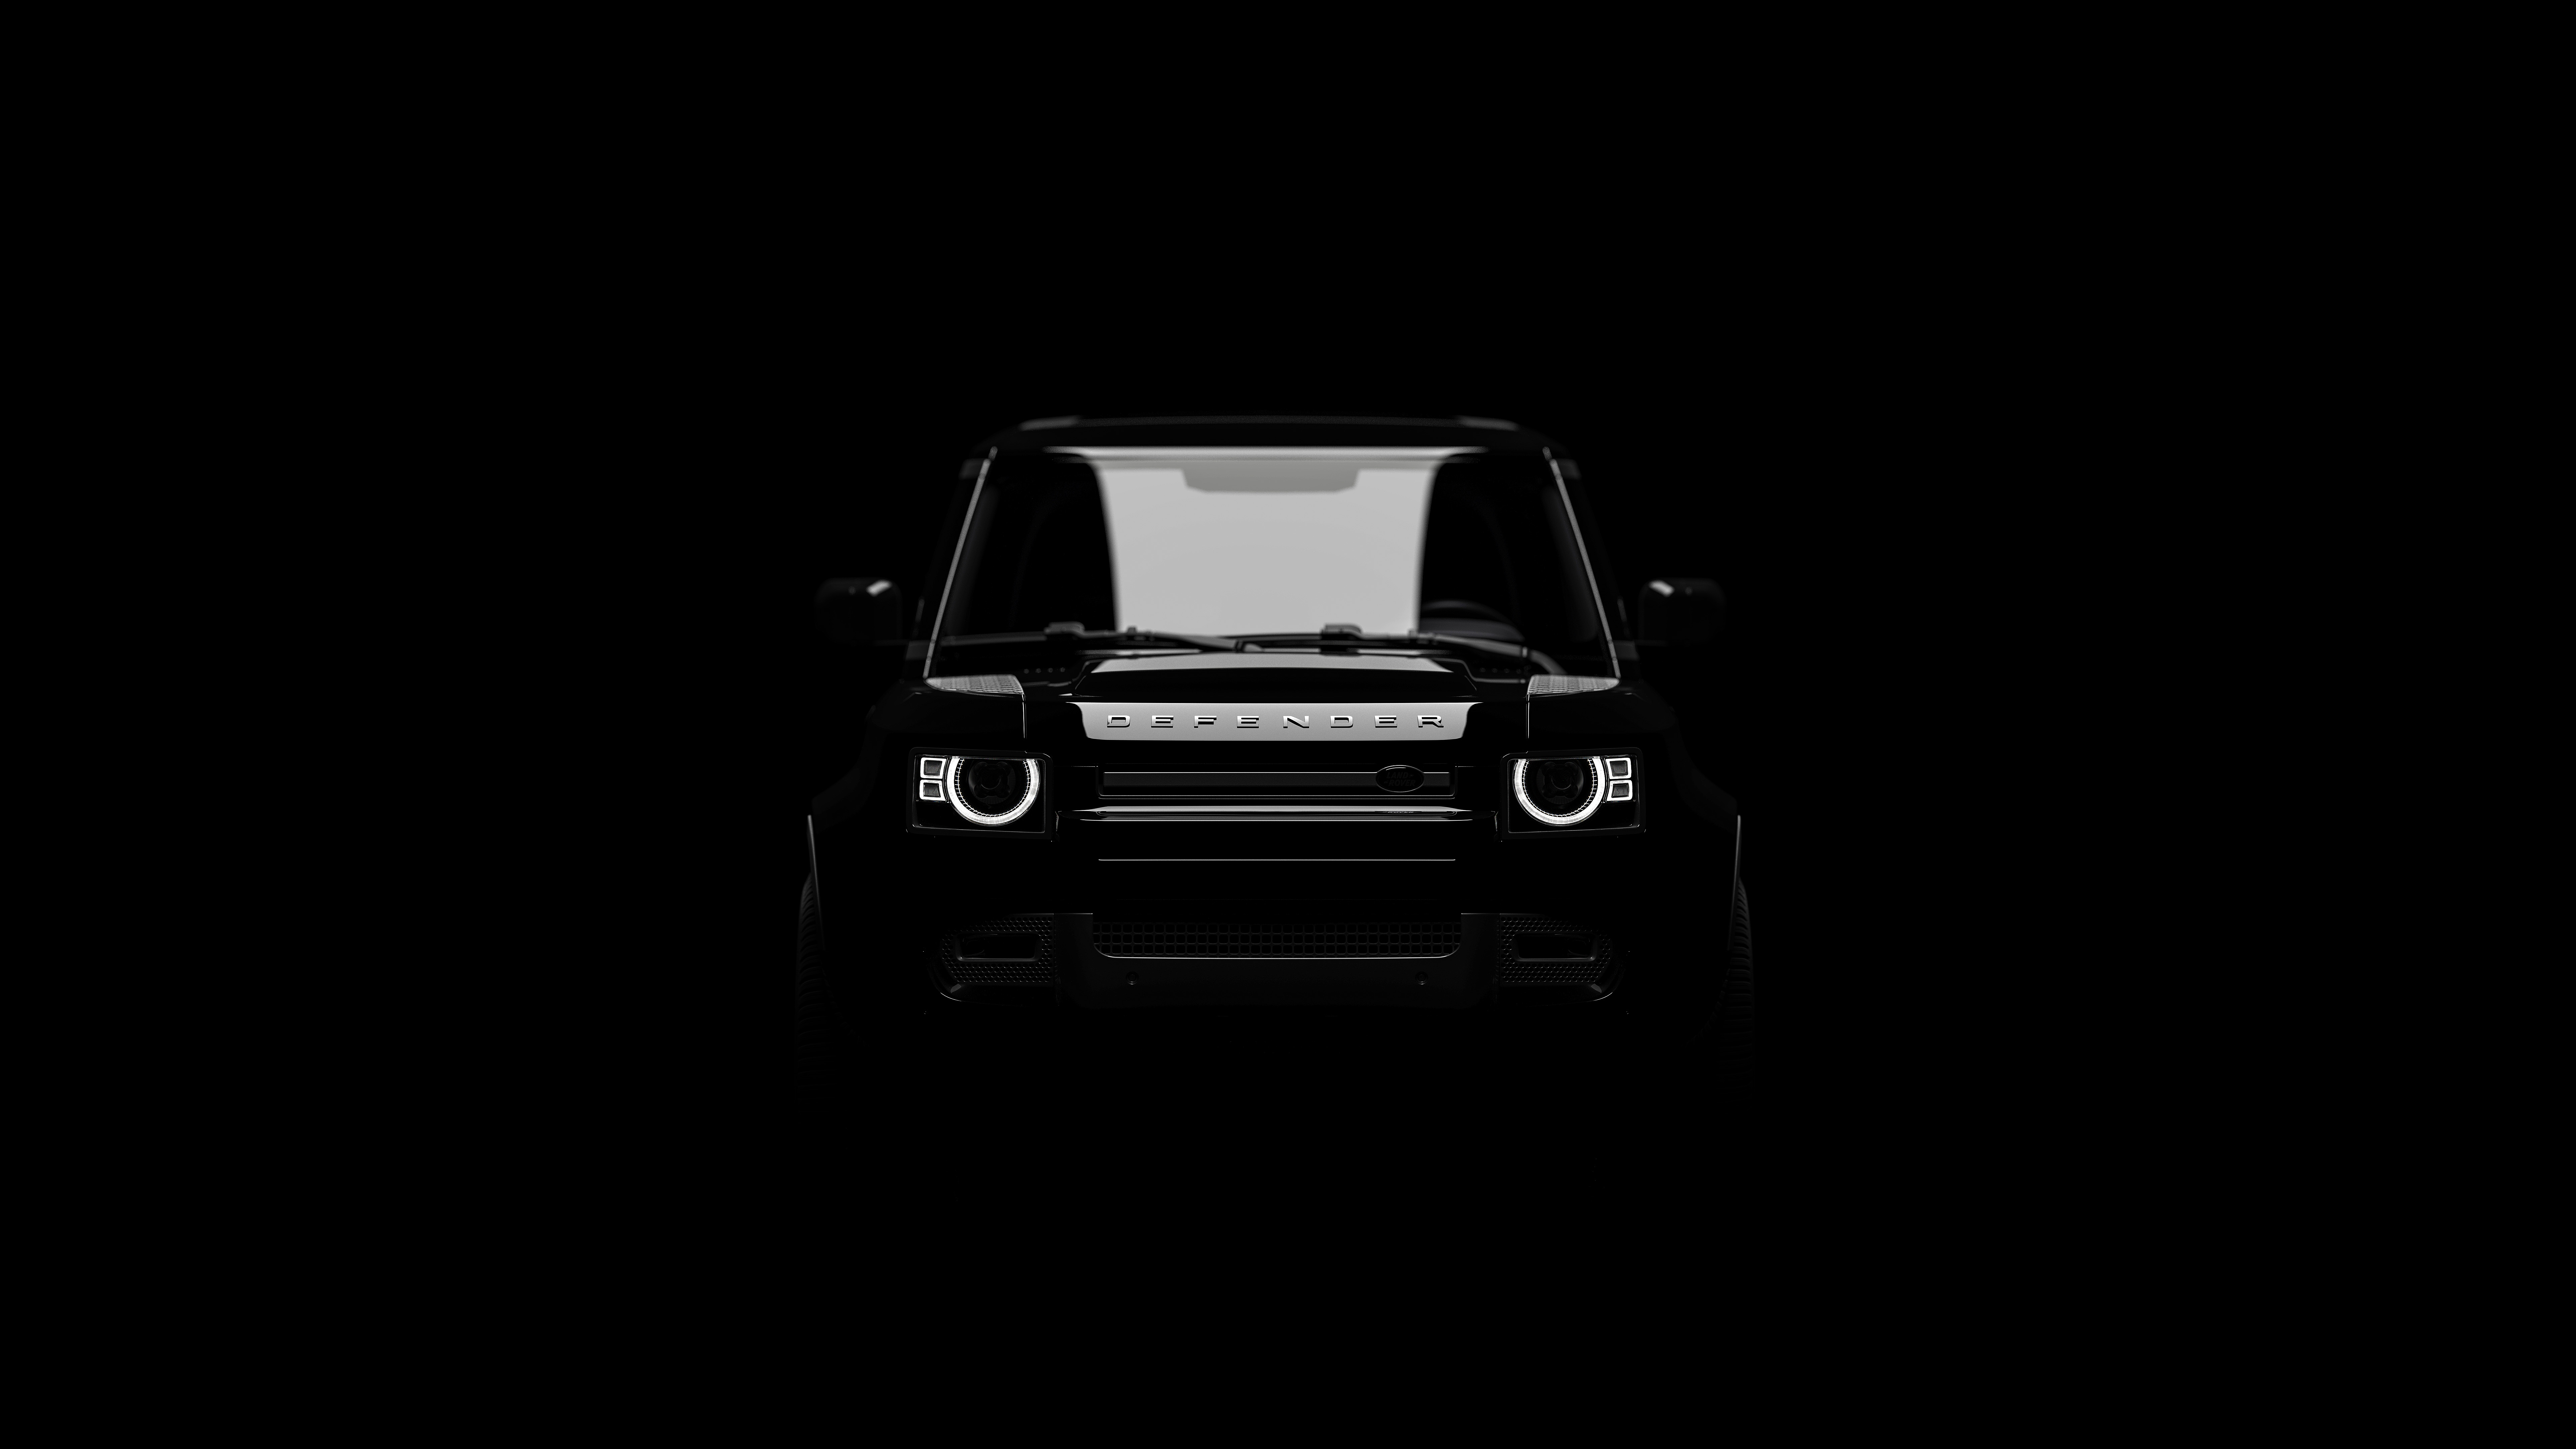 Land Rover Land Rover Defender Car Vehicle Offroad Minimalism Dark Monochrome Front Angle View Black 7680x4320